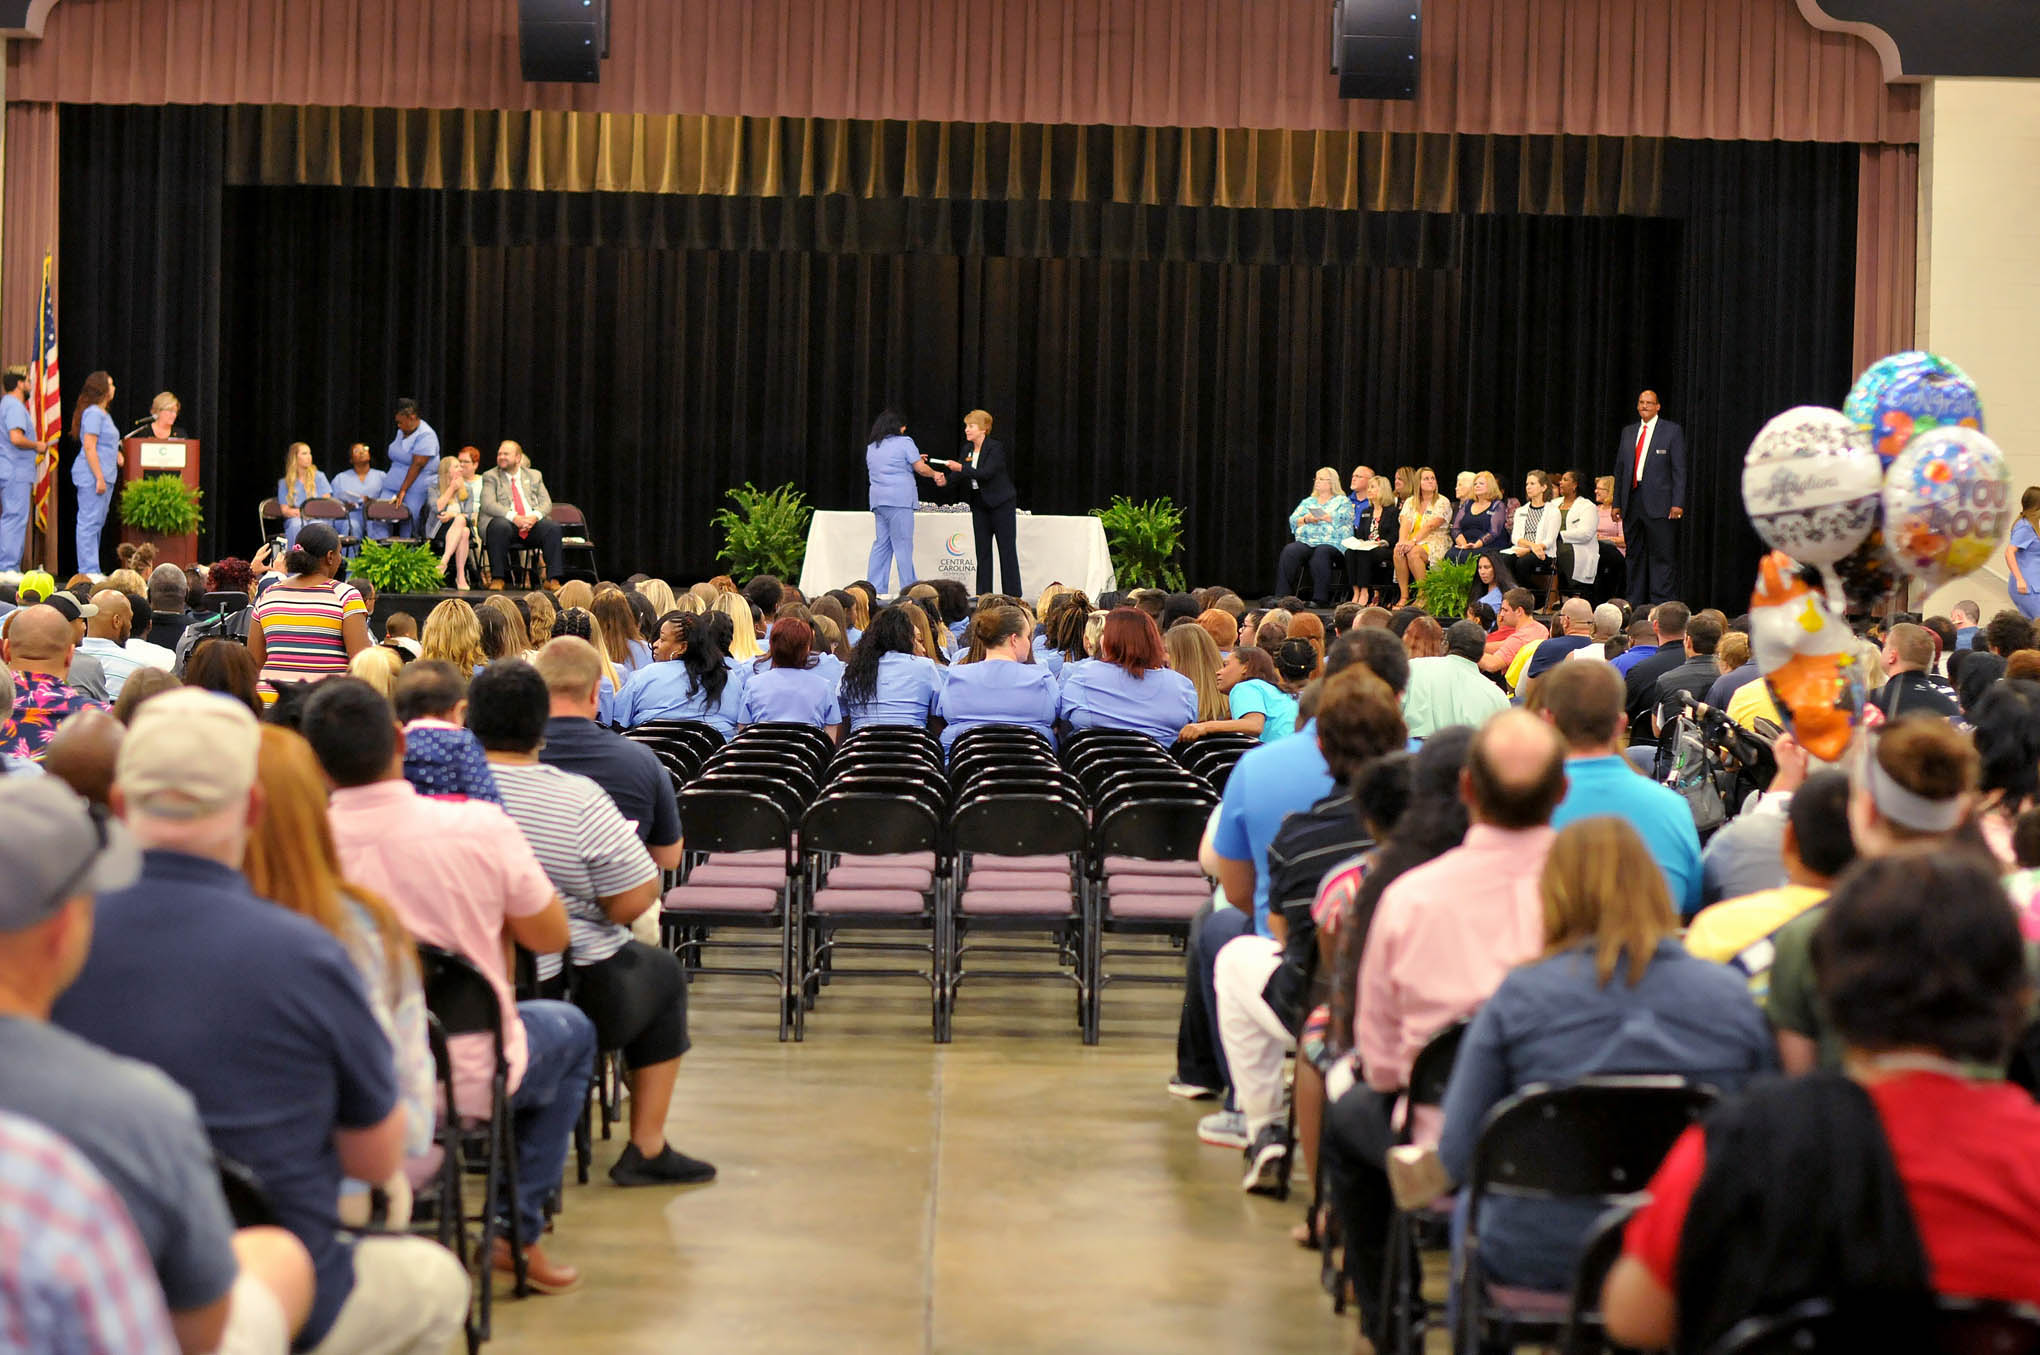 Approximately 270 graduate from CCCC's Continuing Education Medical Programs